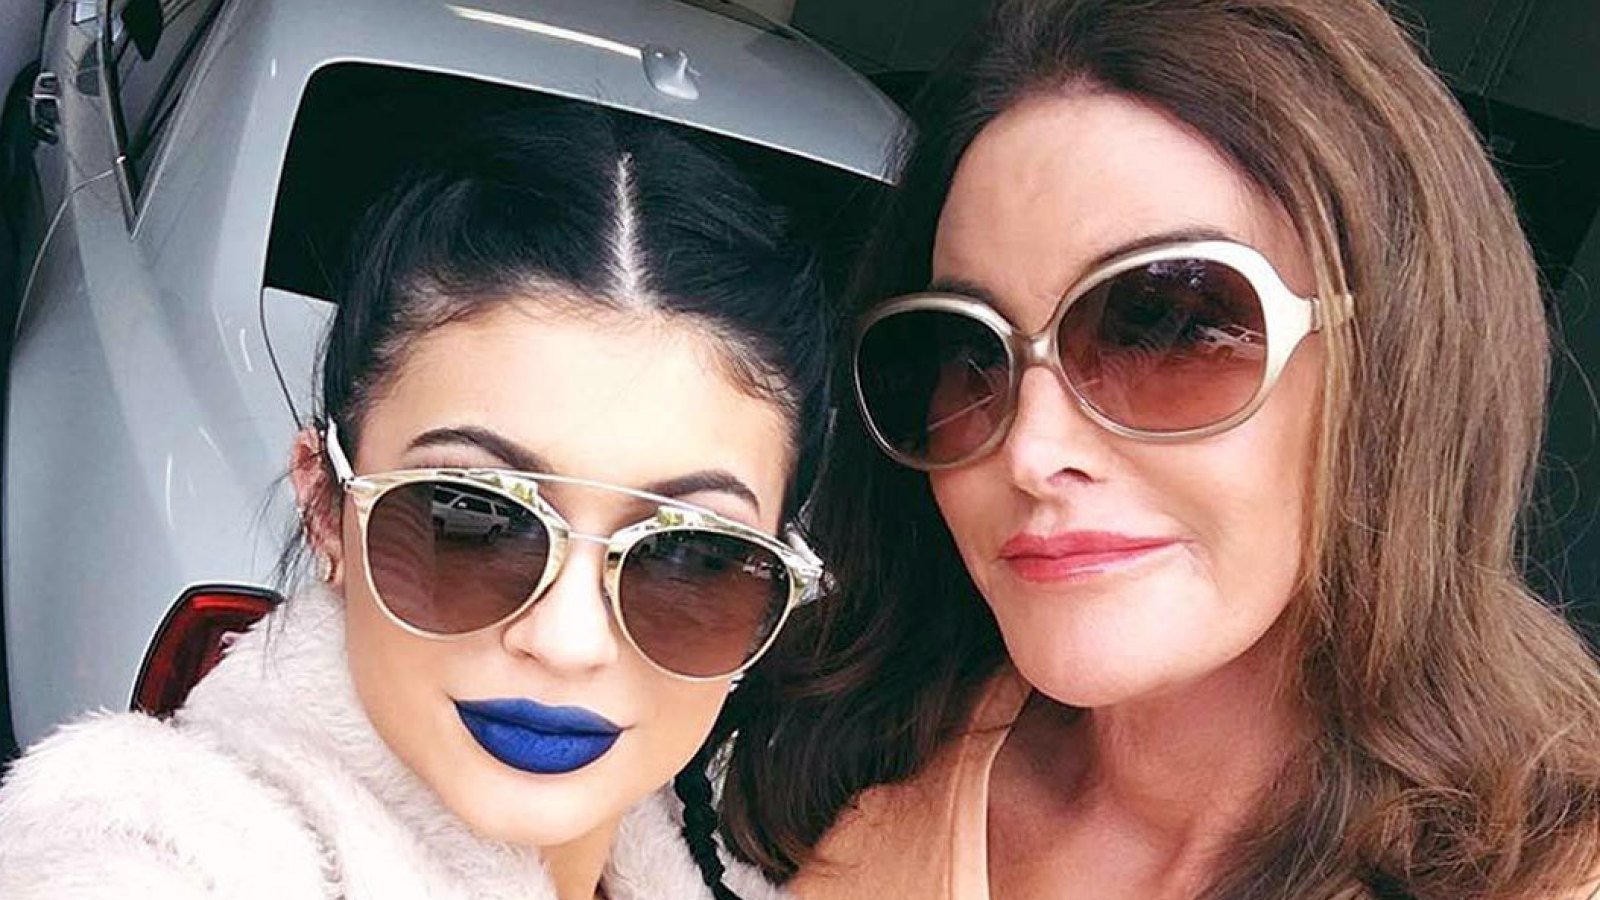 Caitlyn Jenner Is 'Proud' of Kylie Jenner at Stormi's B-Day Party